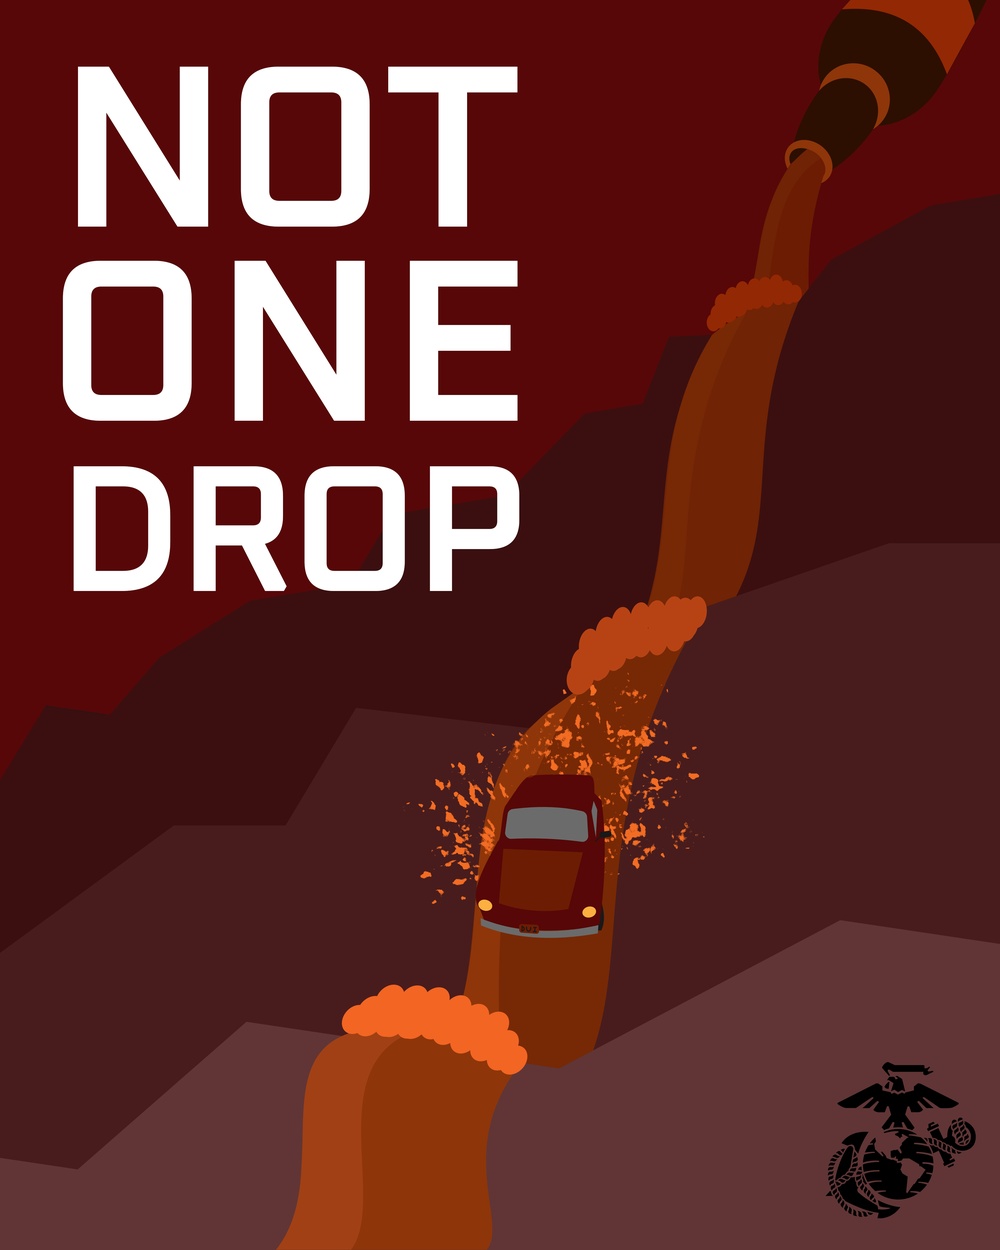 One Drop is a Slippery Slope